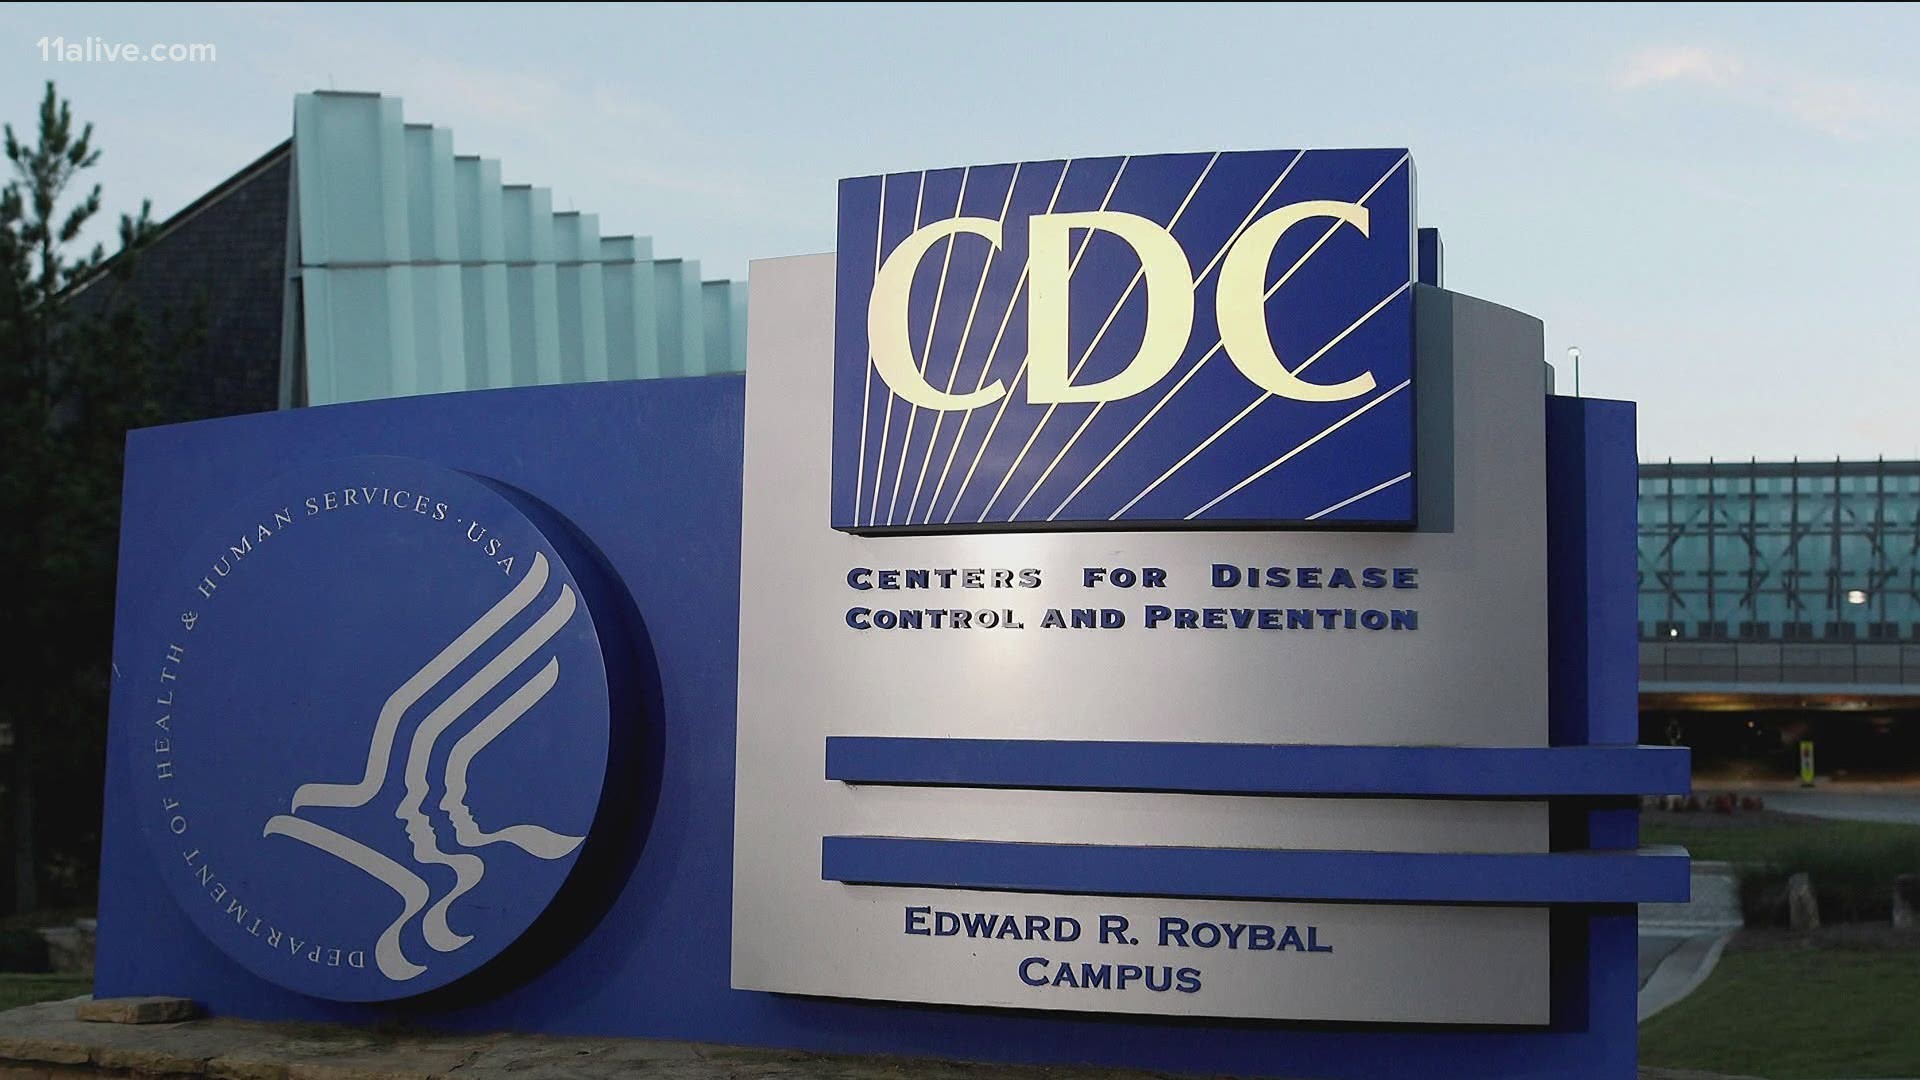 Here is what the CDC has to say.